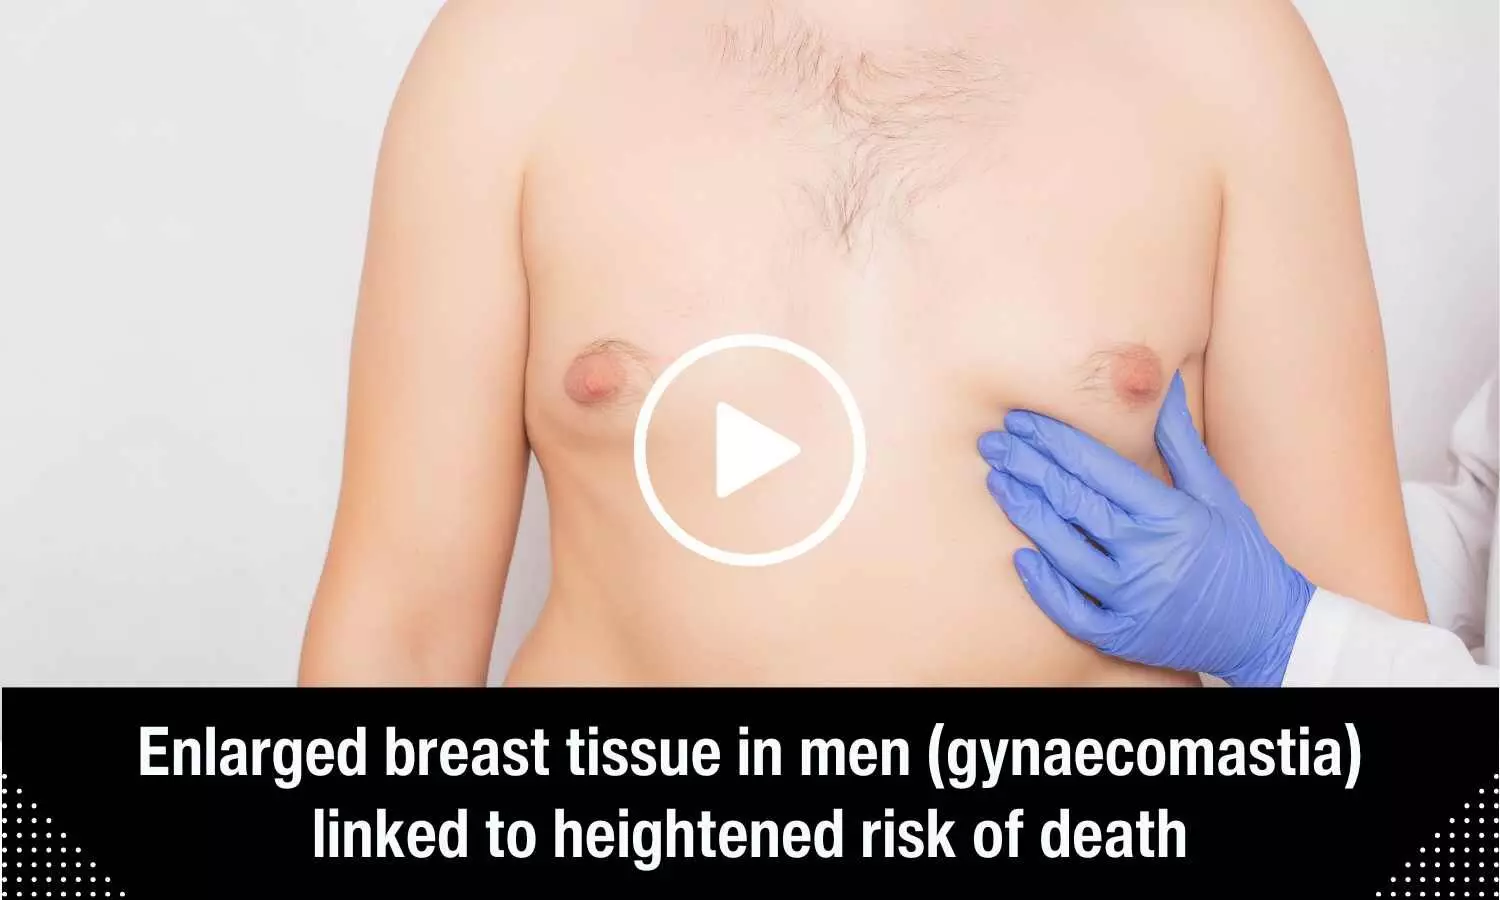 Enlarged breast tissue in men linked to heightened risk of death